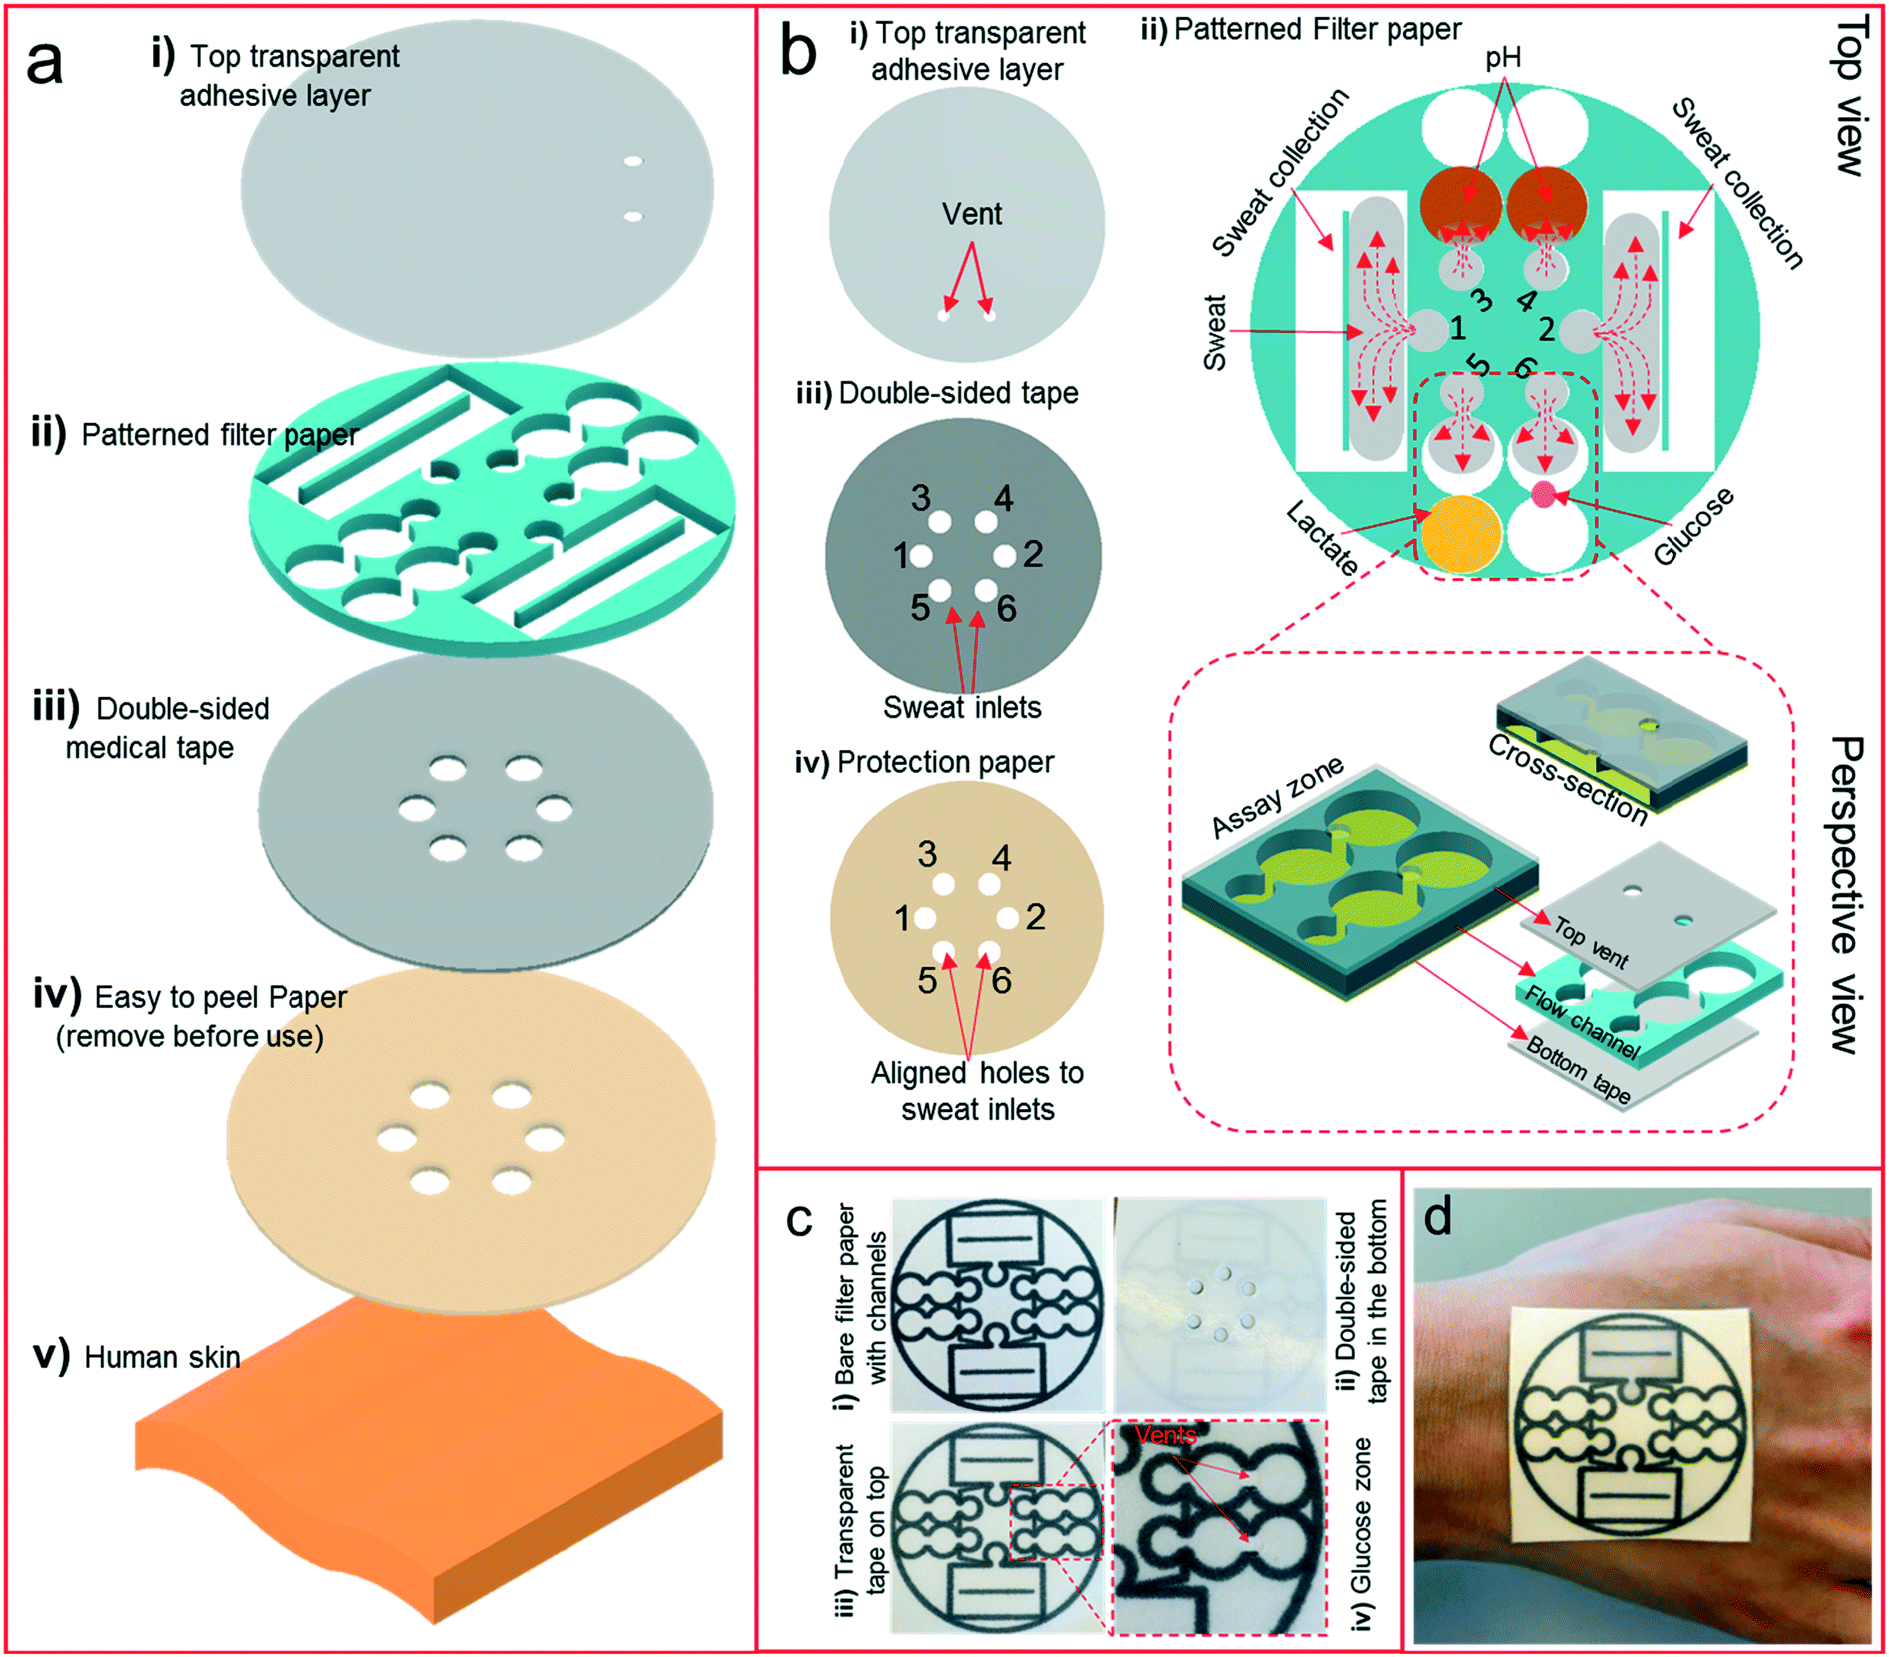 A versatile, cost-effective, and flexible wearable biosensor for in situ  and ex situ sweat analysis, and personalized nutrition assessment - Lab on  a Chip (RSC Publishing) DOI:10.1039/C9LC00734B